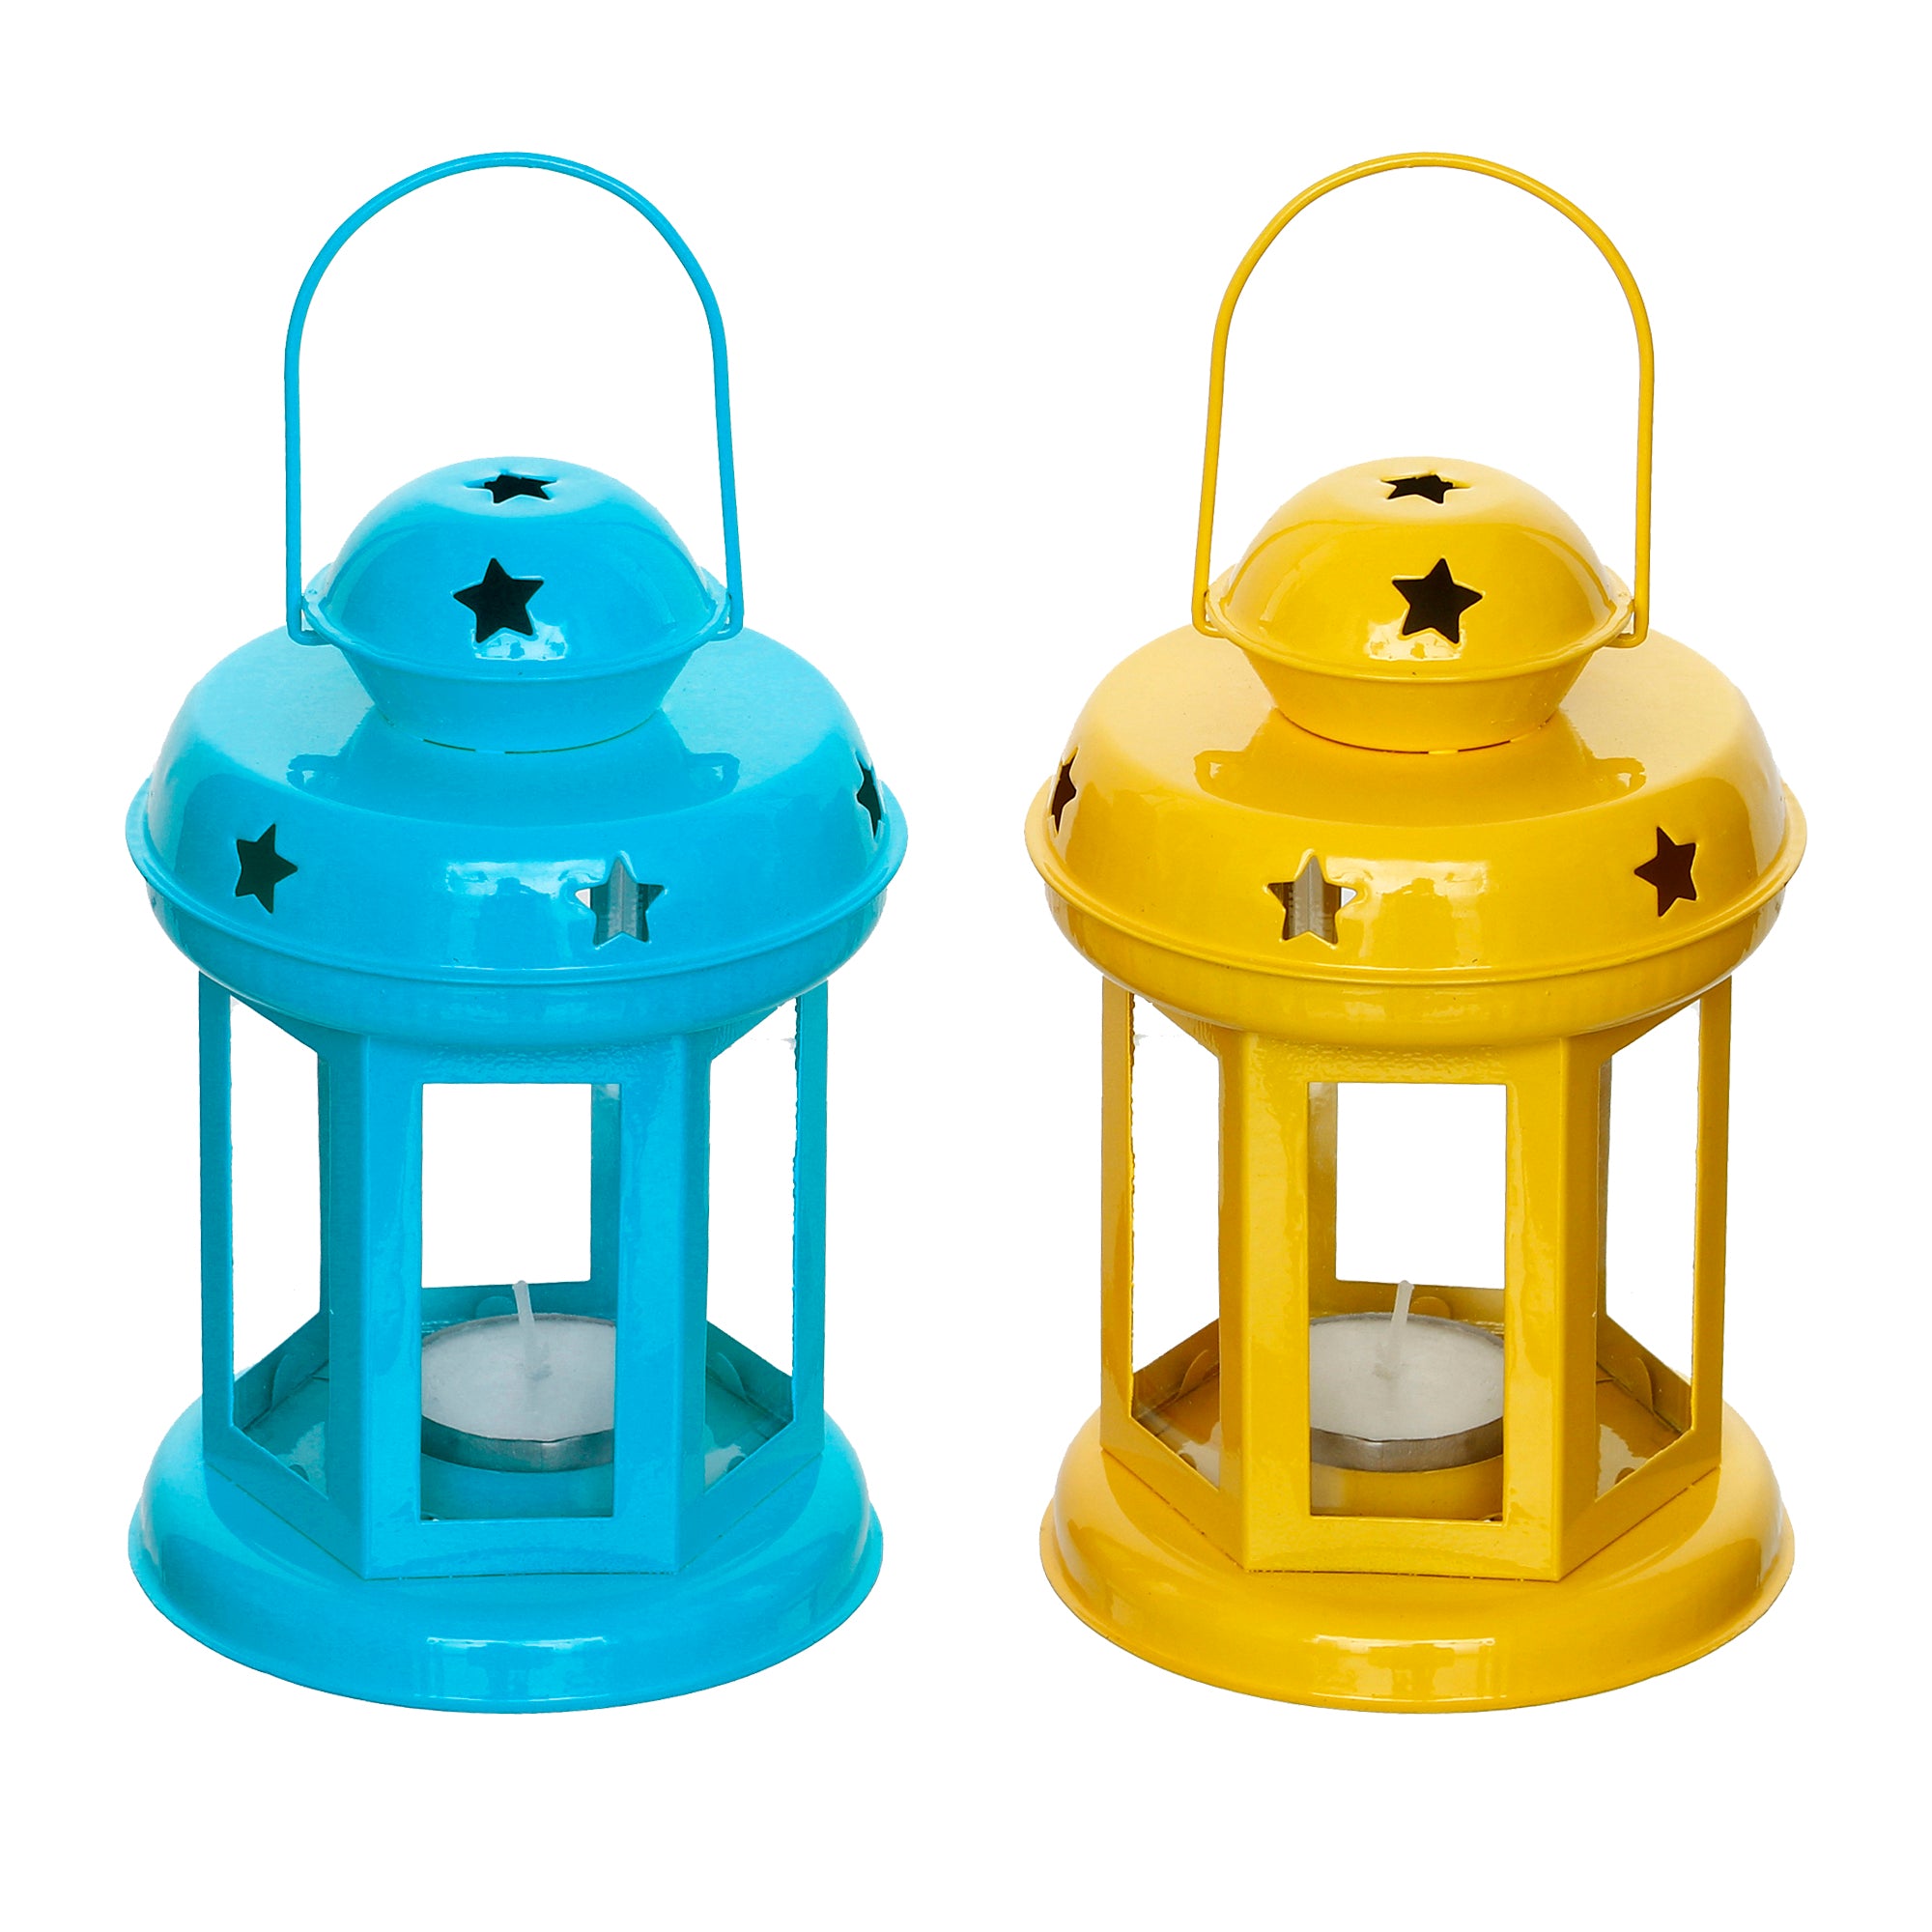 Set of 2 Blue and Yellow Metal hanging Tea Light Candle Holder Lantern with Tealight Candle 5